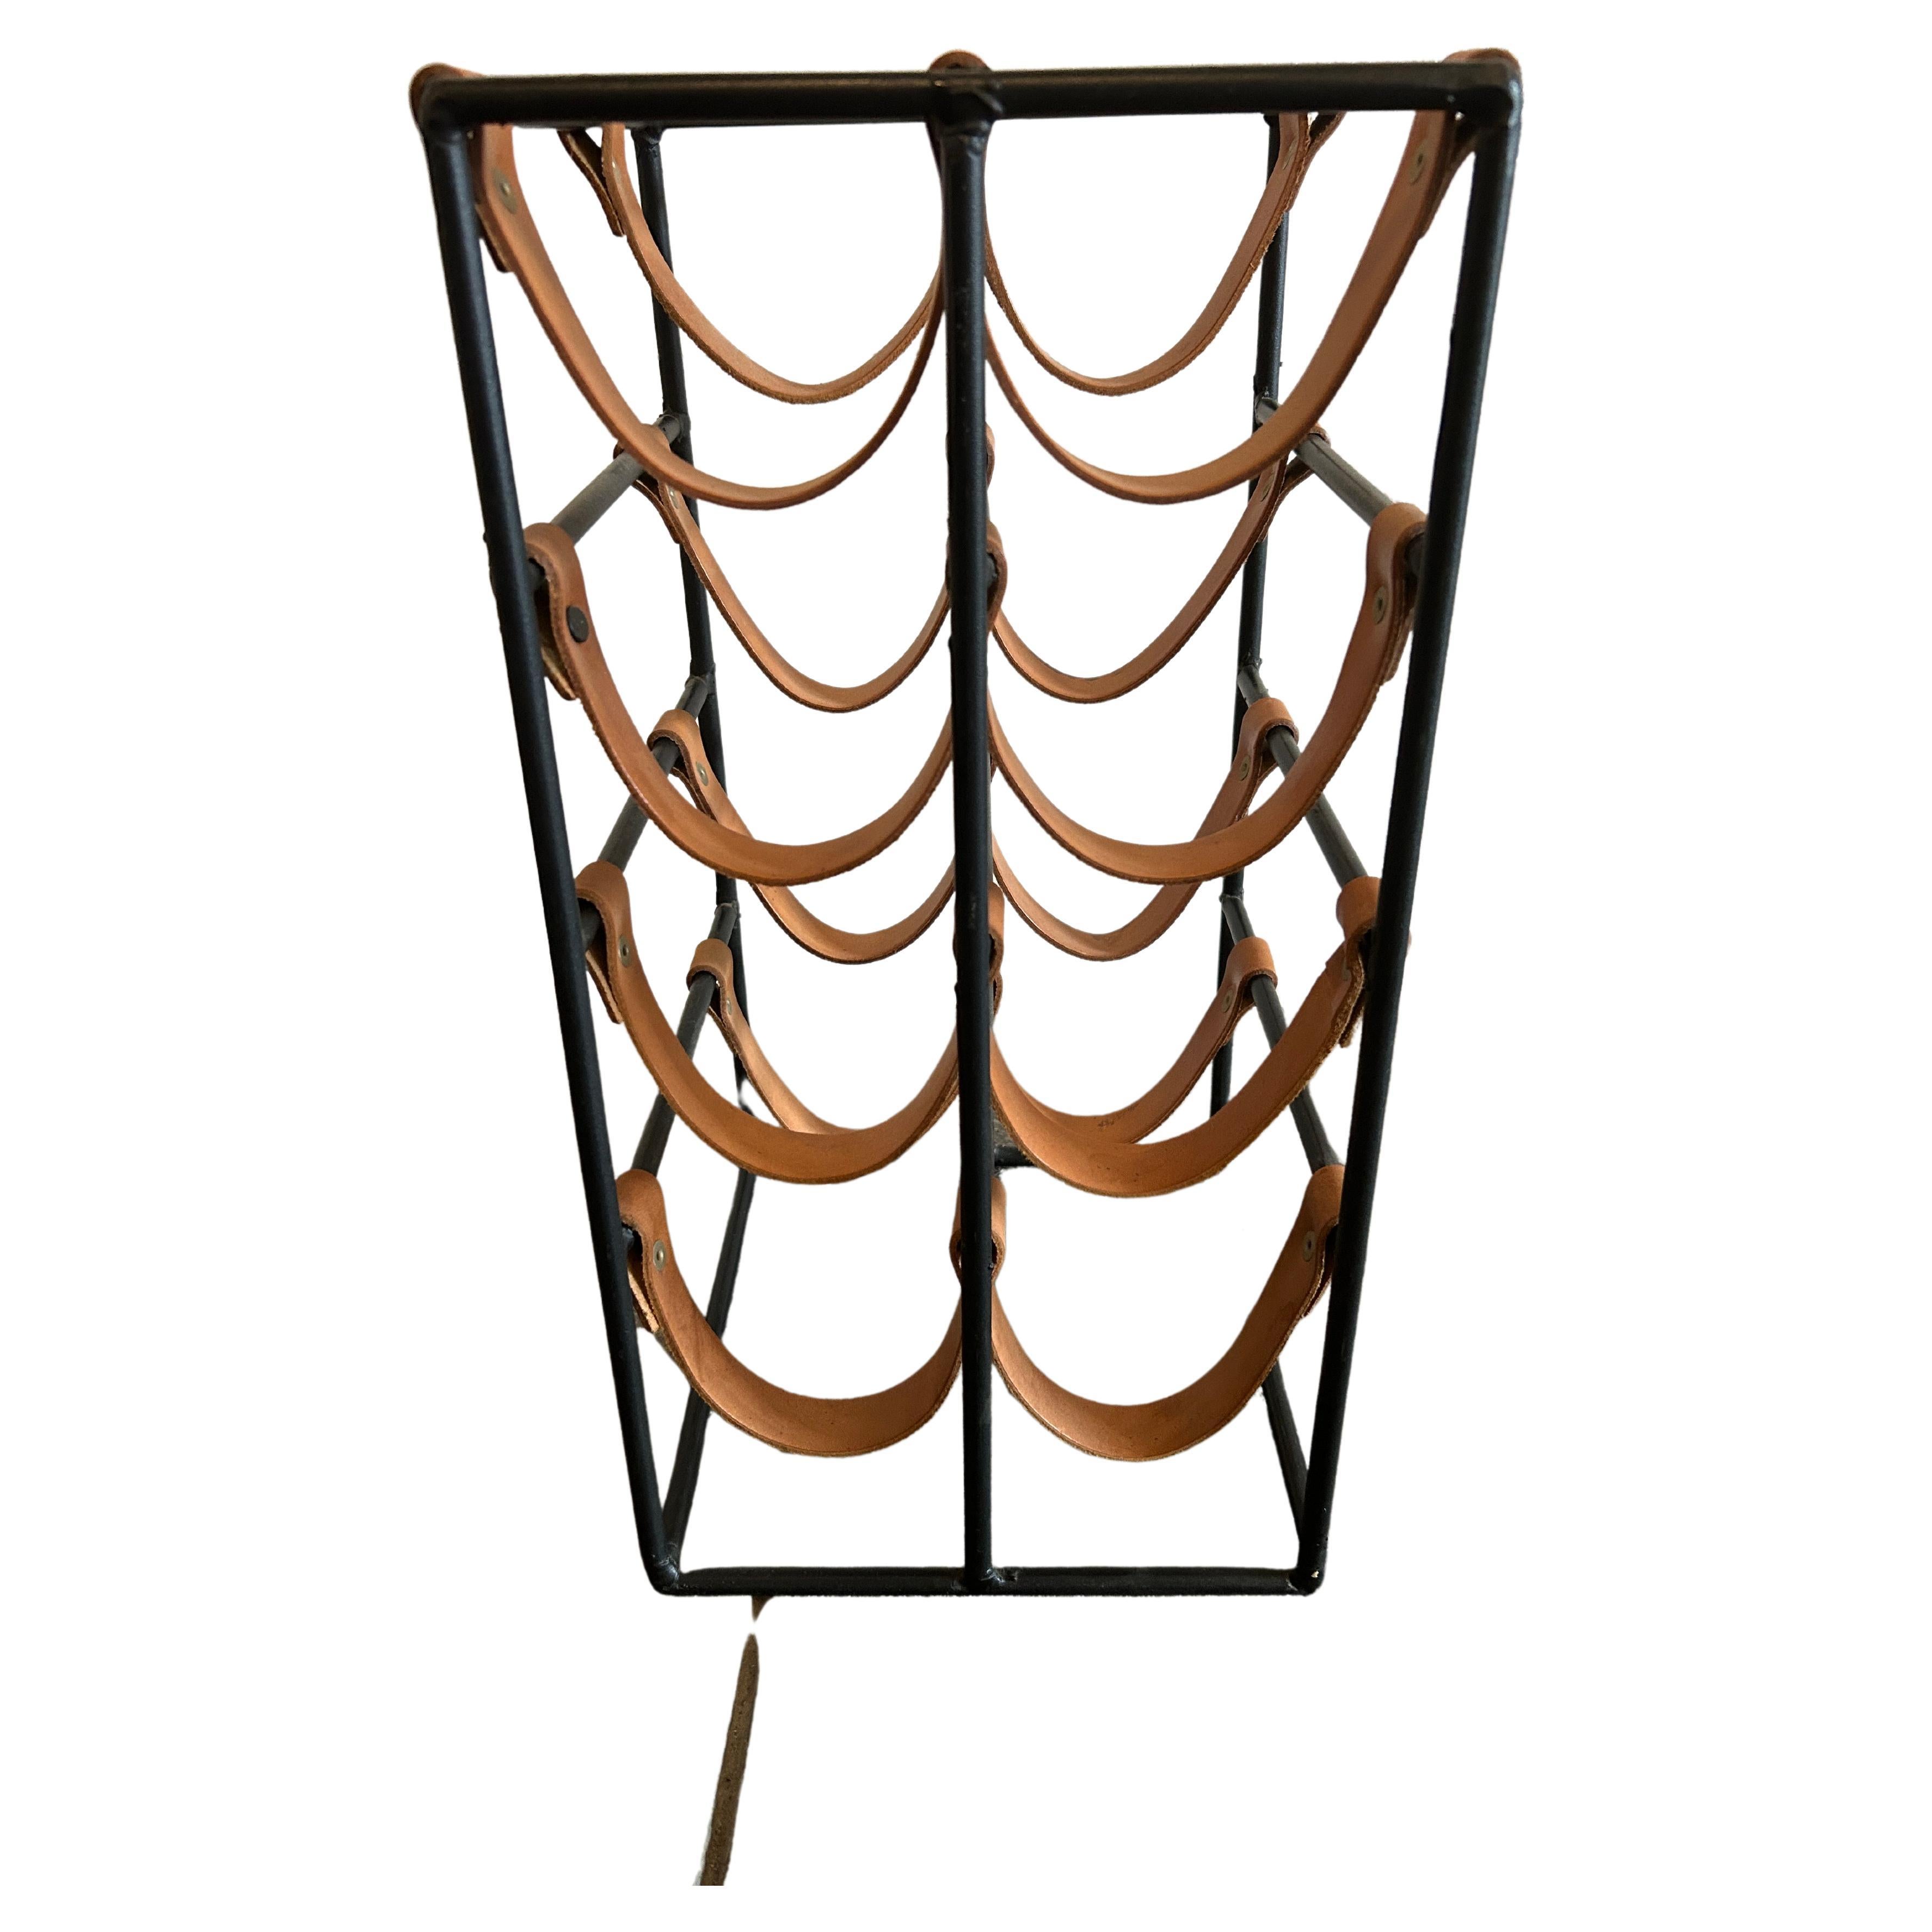 Arthur Umanoff for Shaver Howard 1950s iron and leather strap wine rack. Leather straps are solid.

Holds 8 Bottles of wine.

Measures: Height: 19 in
Width: 10 in
Depth: 9.5 in.